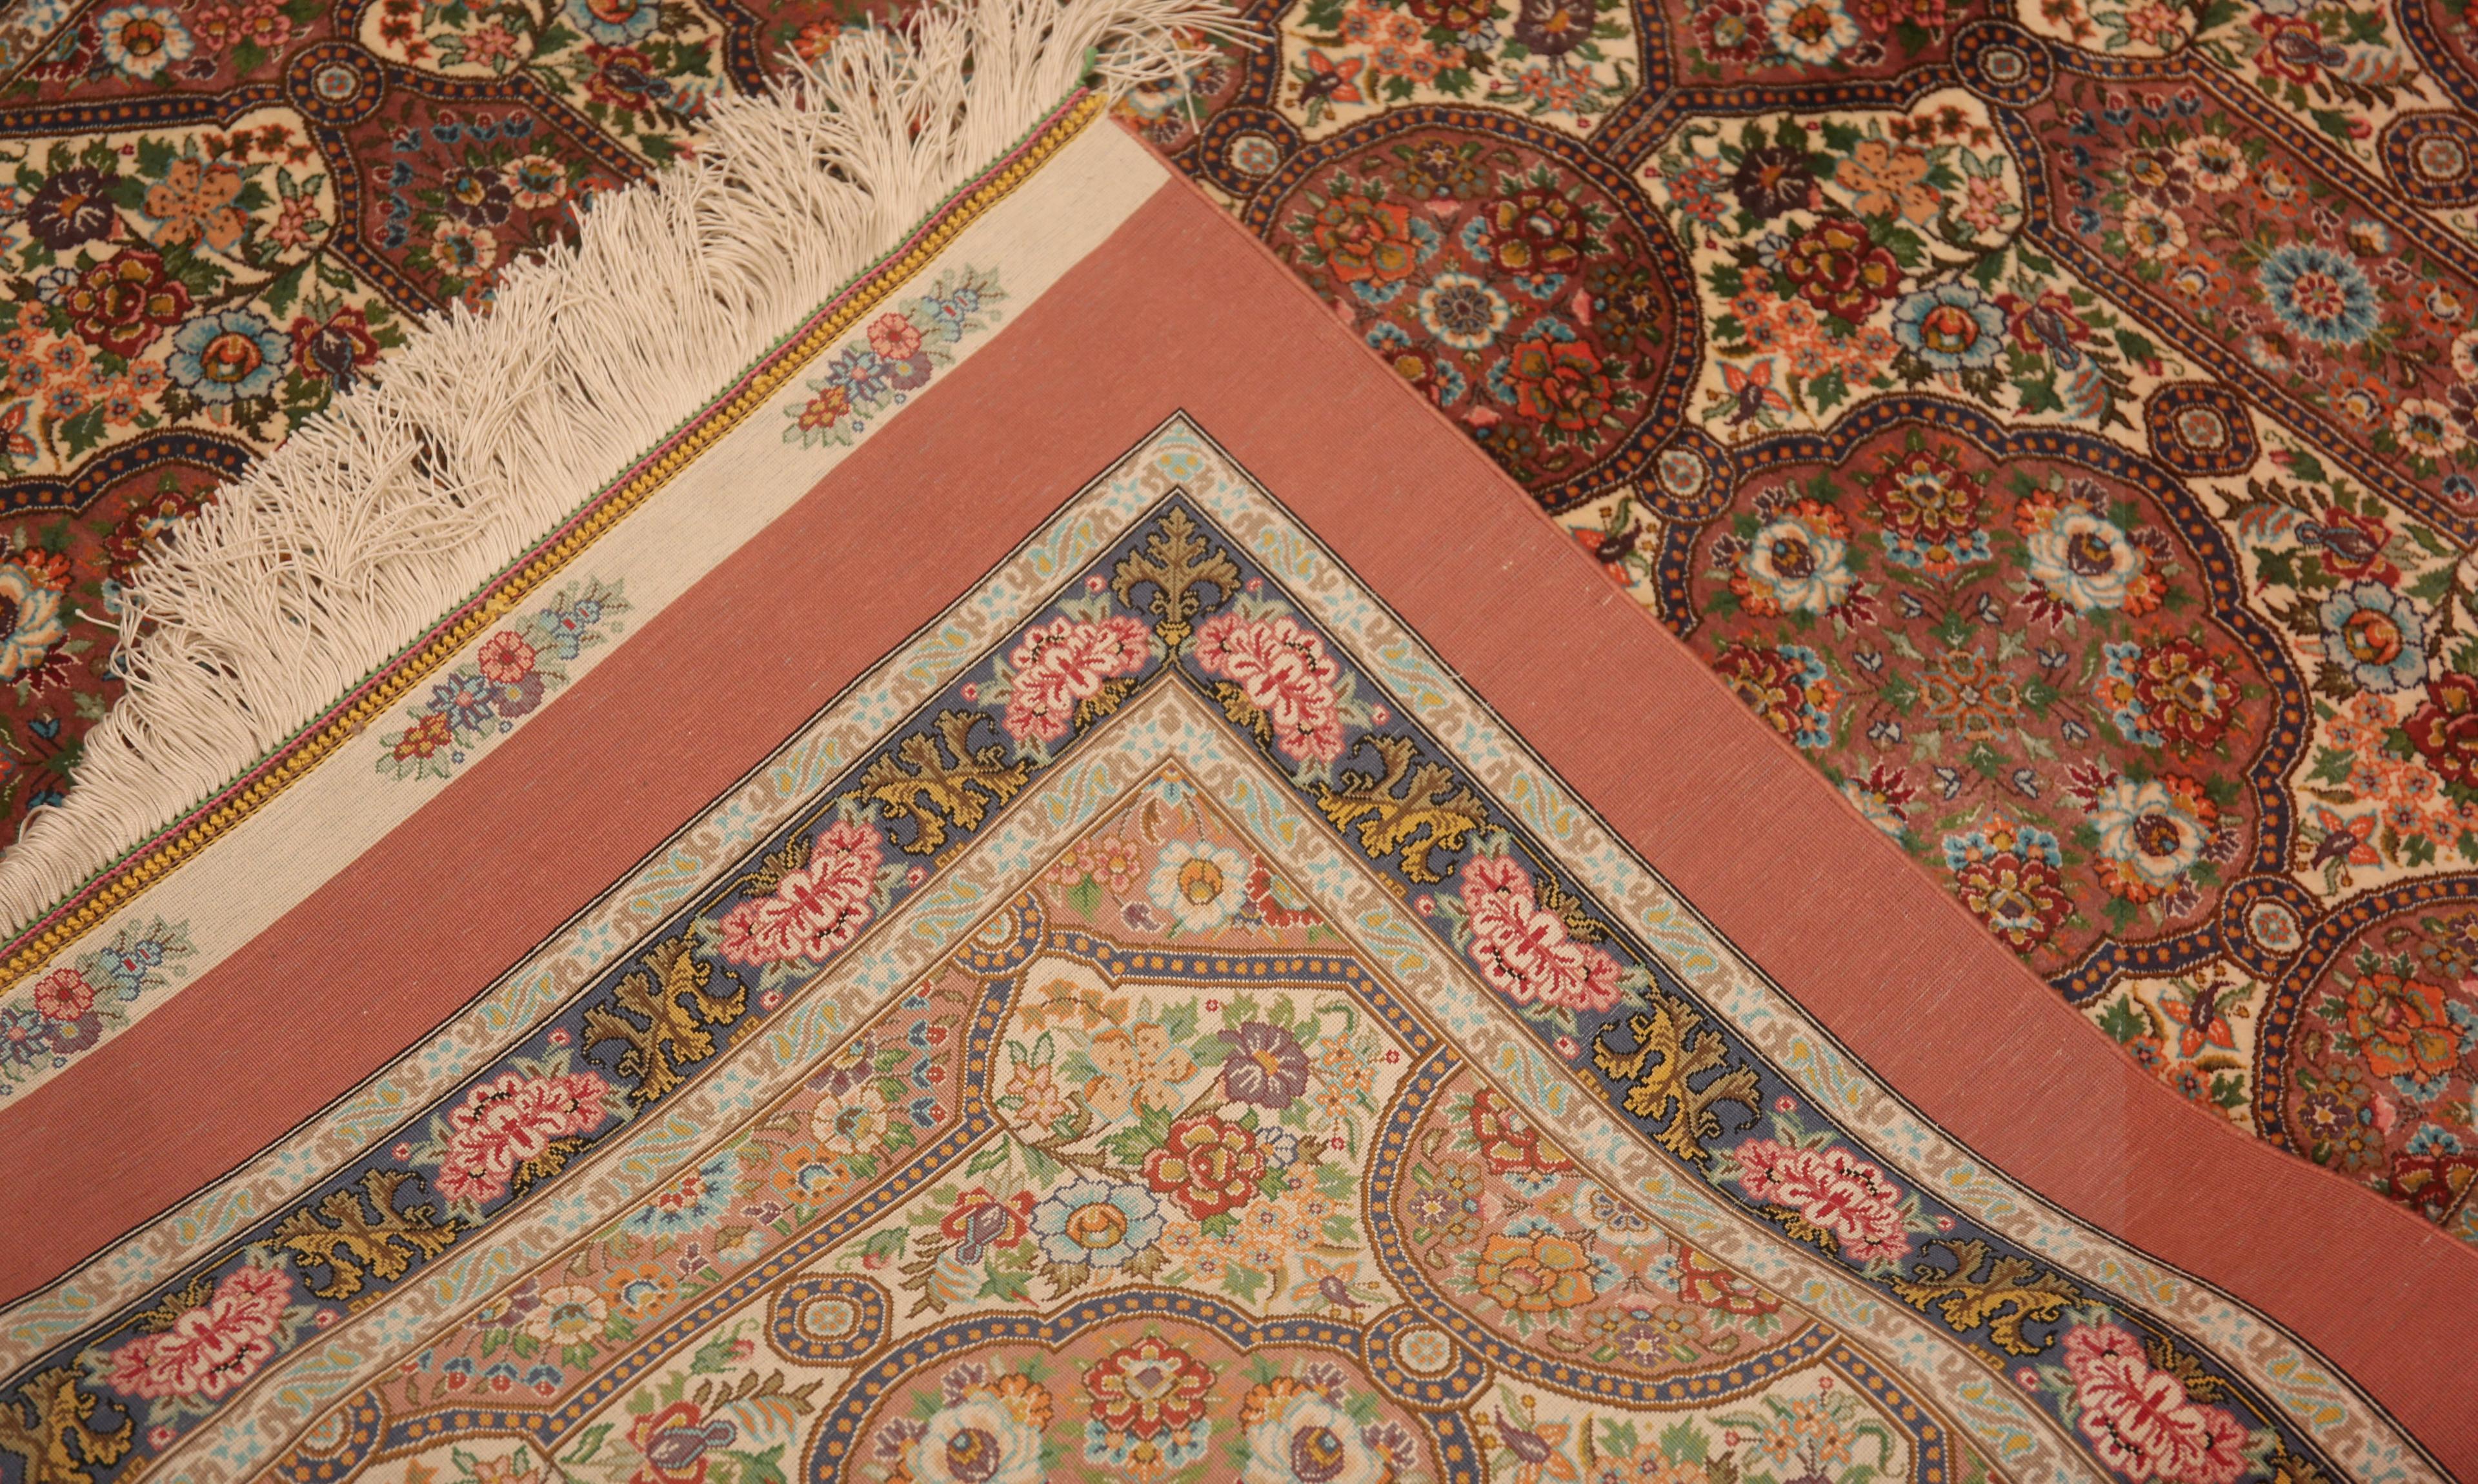 Hand-Knotted Magnificent Intricate Floral Vintage Persian Silk Qum Runner Rug 3'7